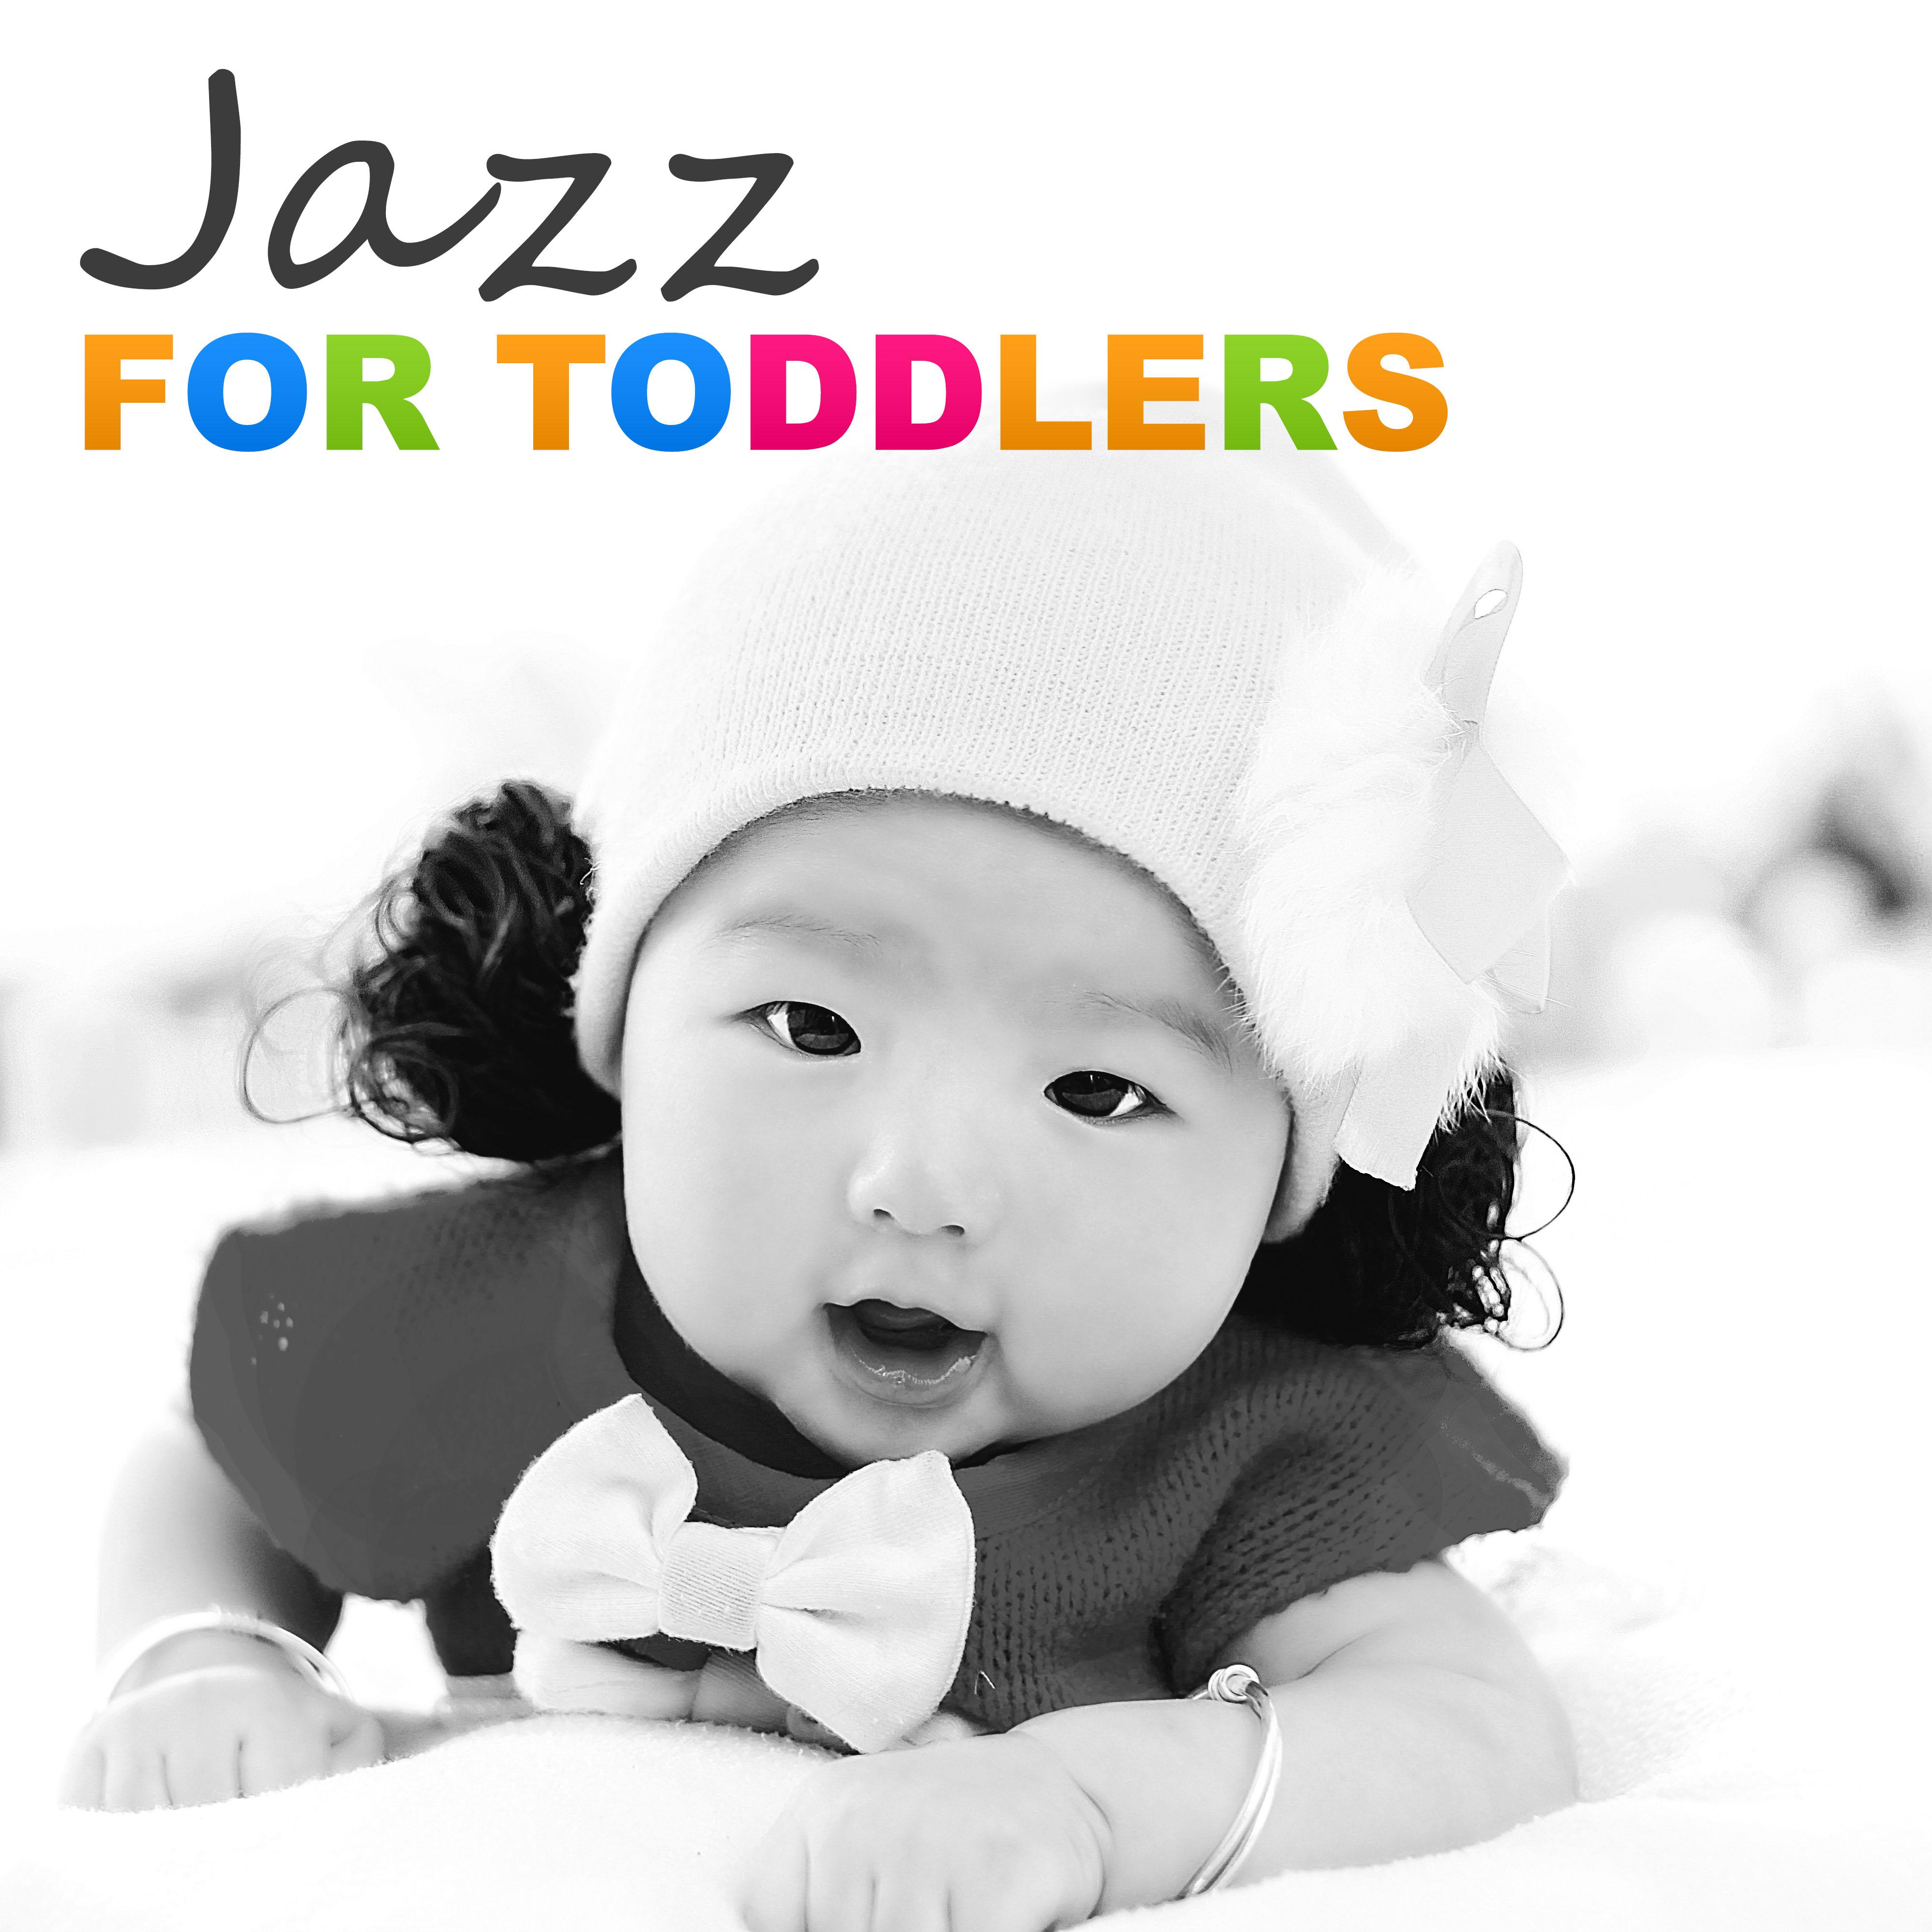 Jazz for Toddlers  Soft and Piano Jazz for Babies, Smooth  Soothing Music for Sleep